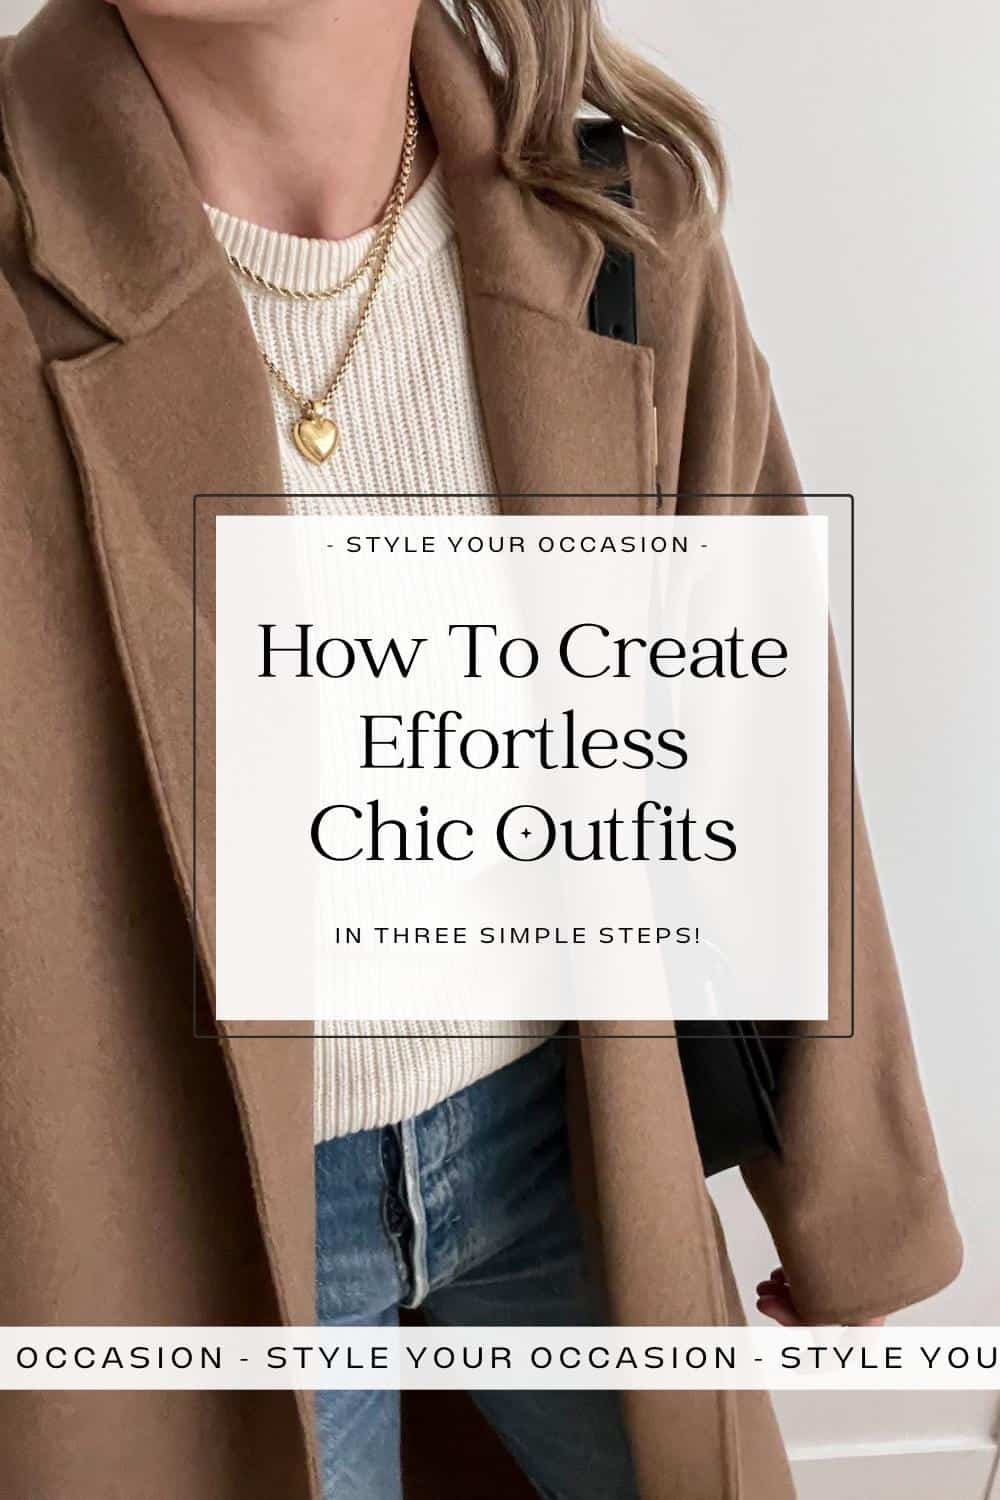 Casual Chic Style: How To Get An Elevated Look Every Time